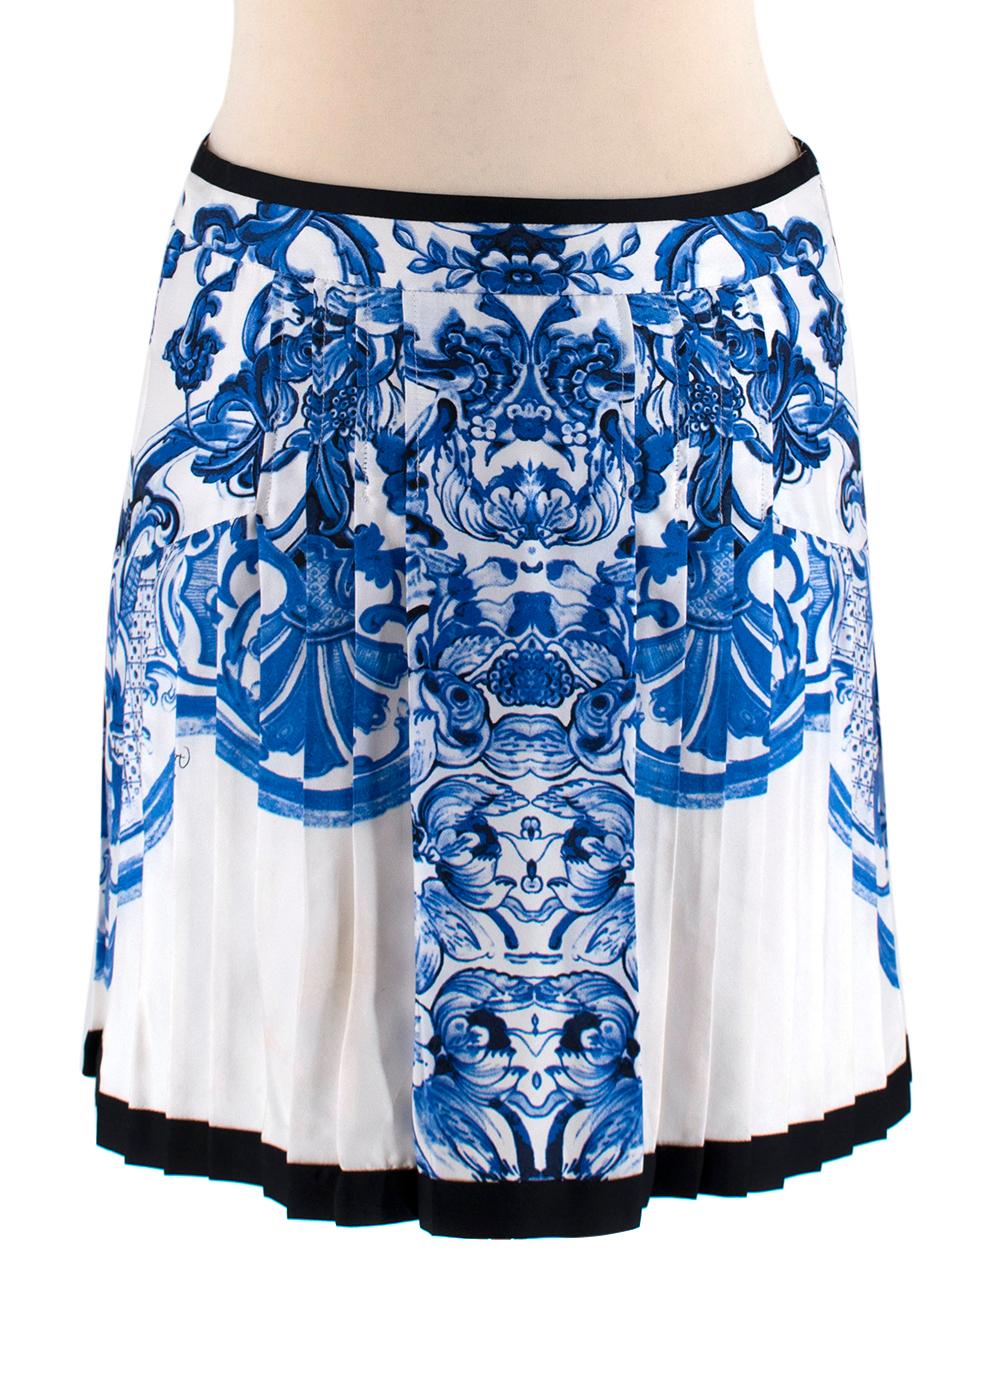 Roberto Cavalli Blue Floral Silk Shirt and Skirt Set

- Pure lightweight silk 
- Elegant blue floral design 
- Shirt features a concealed button fastening and front patch pockets 
- Pleated mini length skirt features a concealed side zip fastening